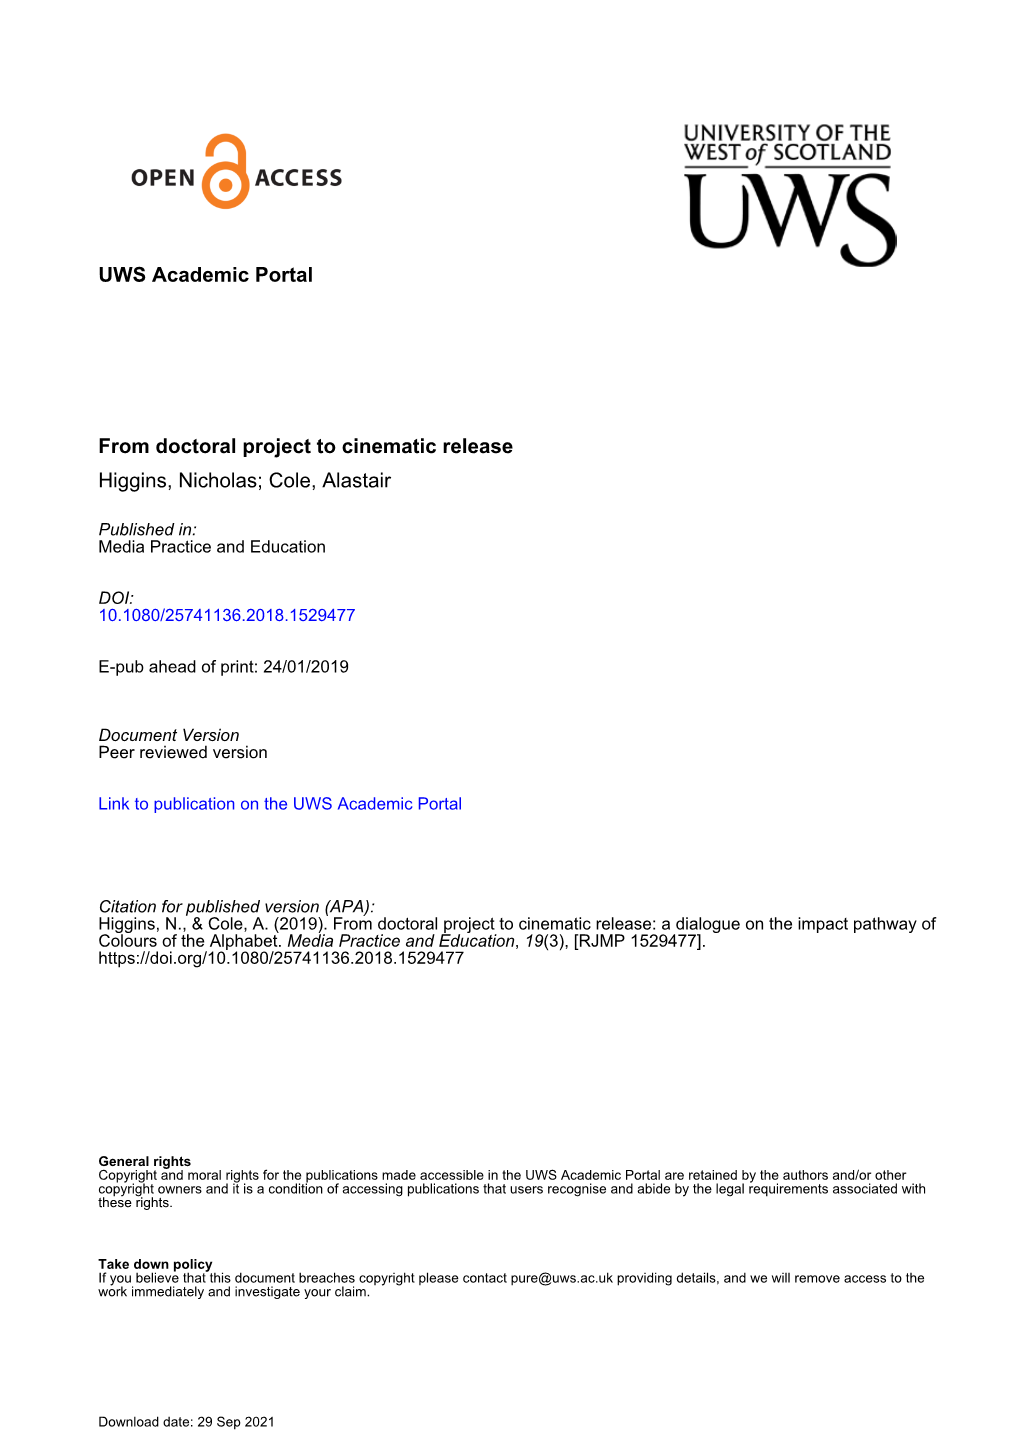 UWS Academic Portal from Doctoral Project to Cinematic Release Higgins, Nicholas; Cole, Alastair